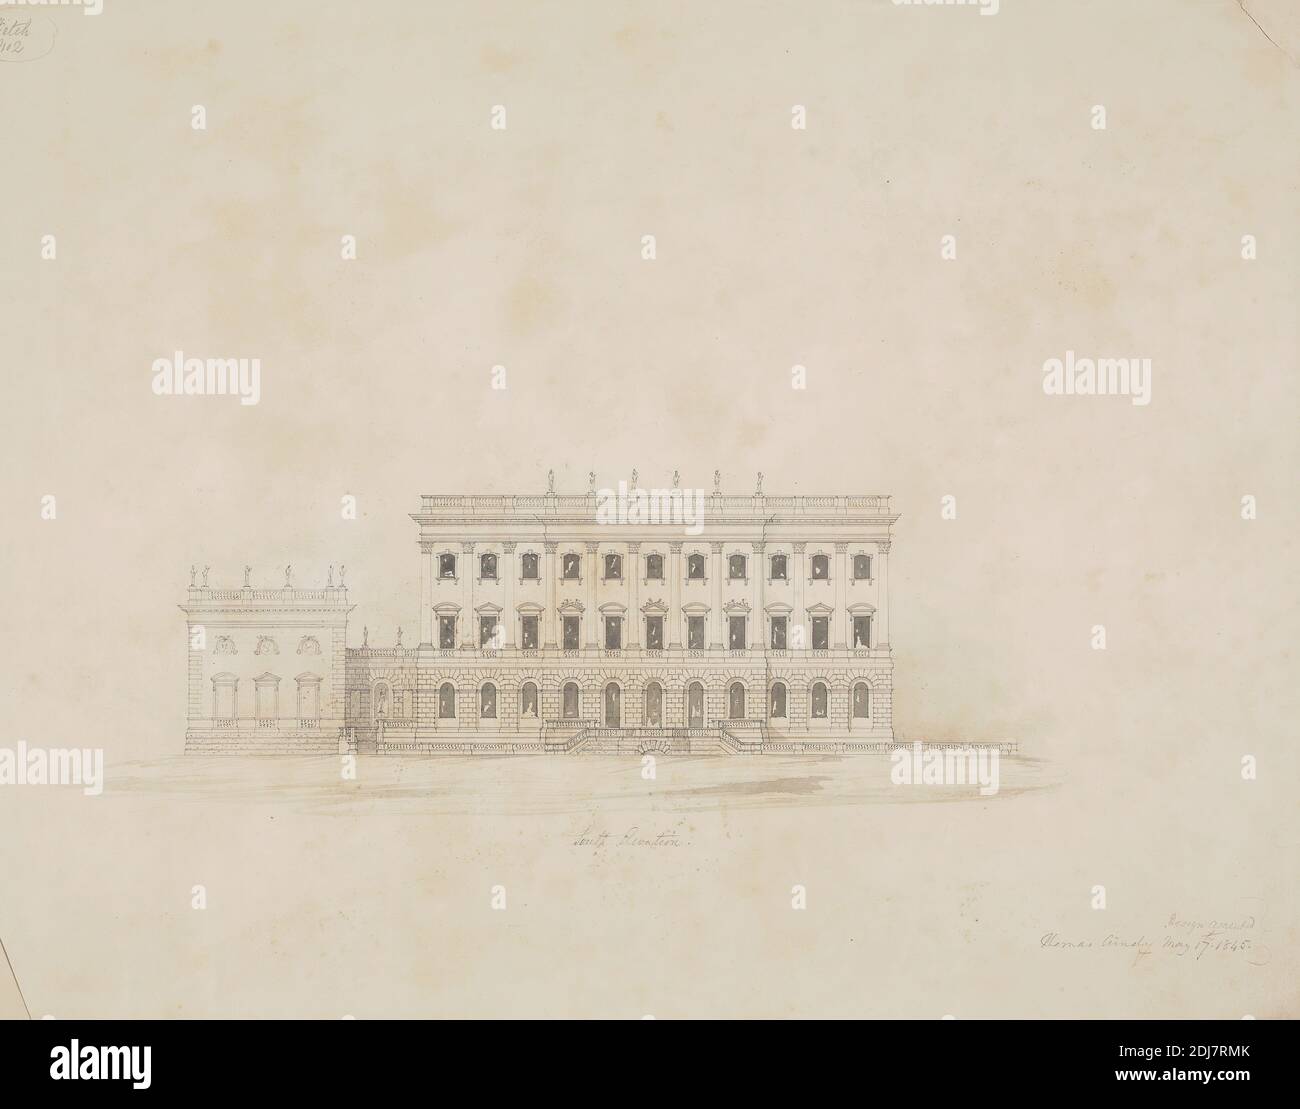 Design for Grosvenor House, London: South Elevation, Thomas Cundy, 1790–1867, British, 1845, Graphite and wash on slightly textured, moderately thick, cream wove paper, Sheet: 18 3/4 × 24 3/8 inches (47.6 × 61.9 cm), architectural subject, design, house, England, Europe, London, United Kingdom Stock Photo